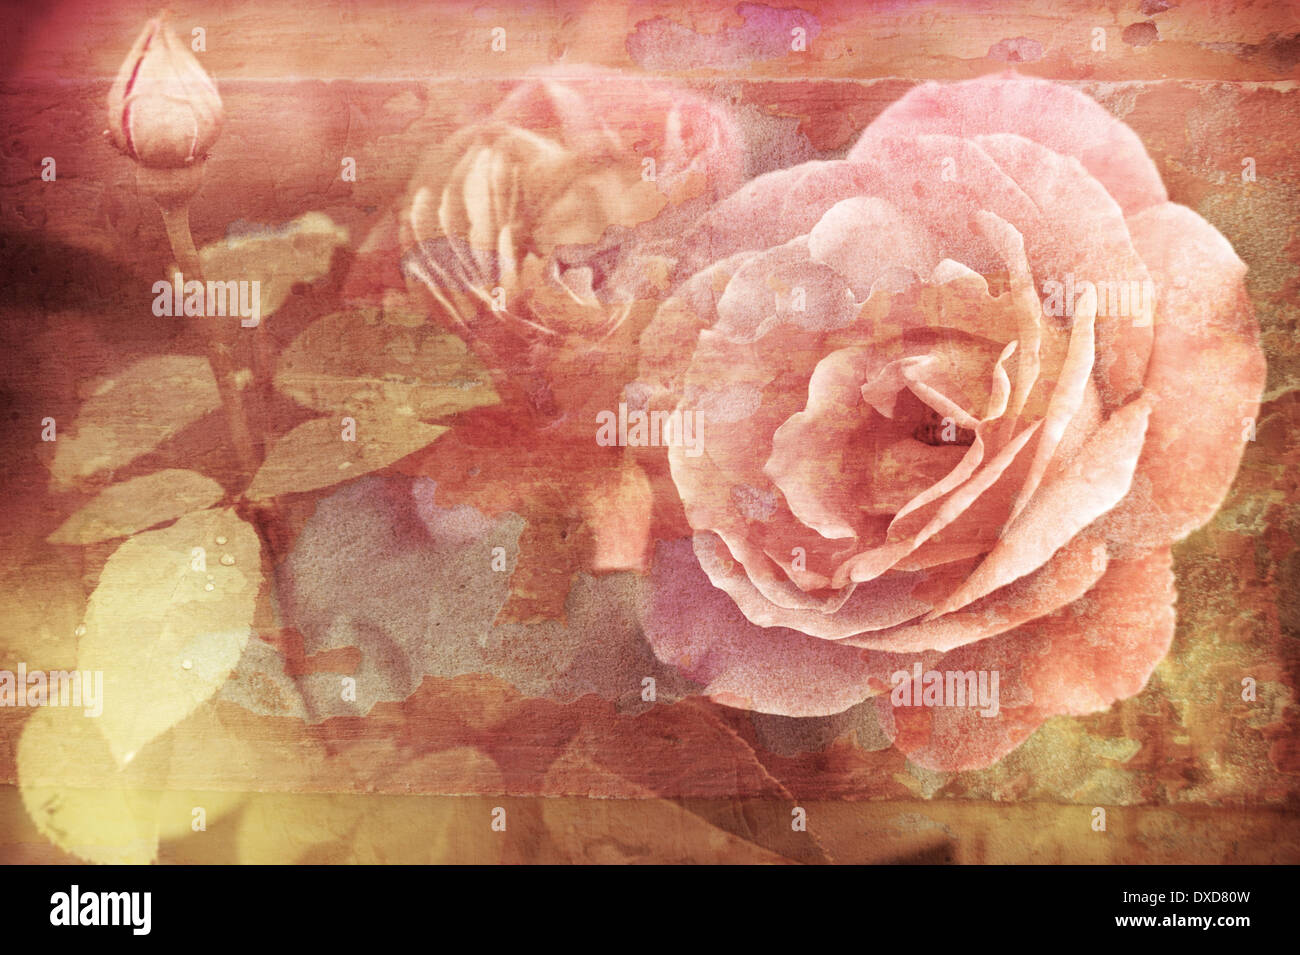 Abstract romantic pink roses flowers water drops Floral background soft selective focus Vintage style processing image Stock Photo